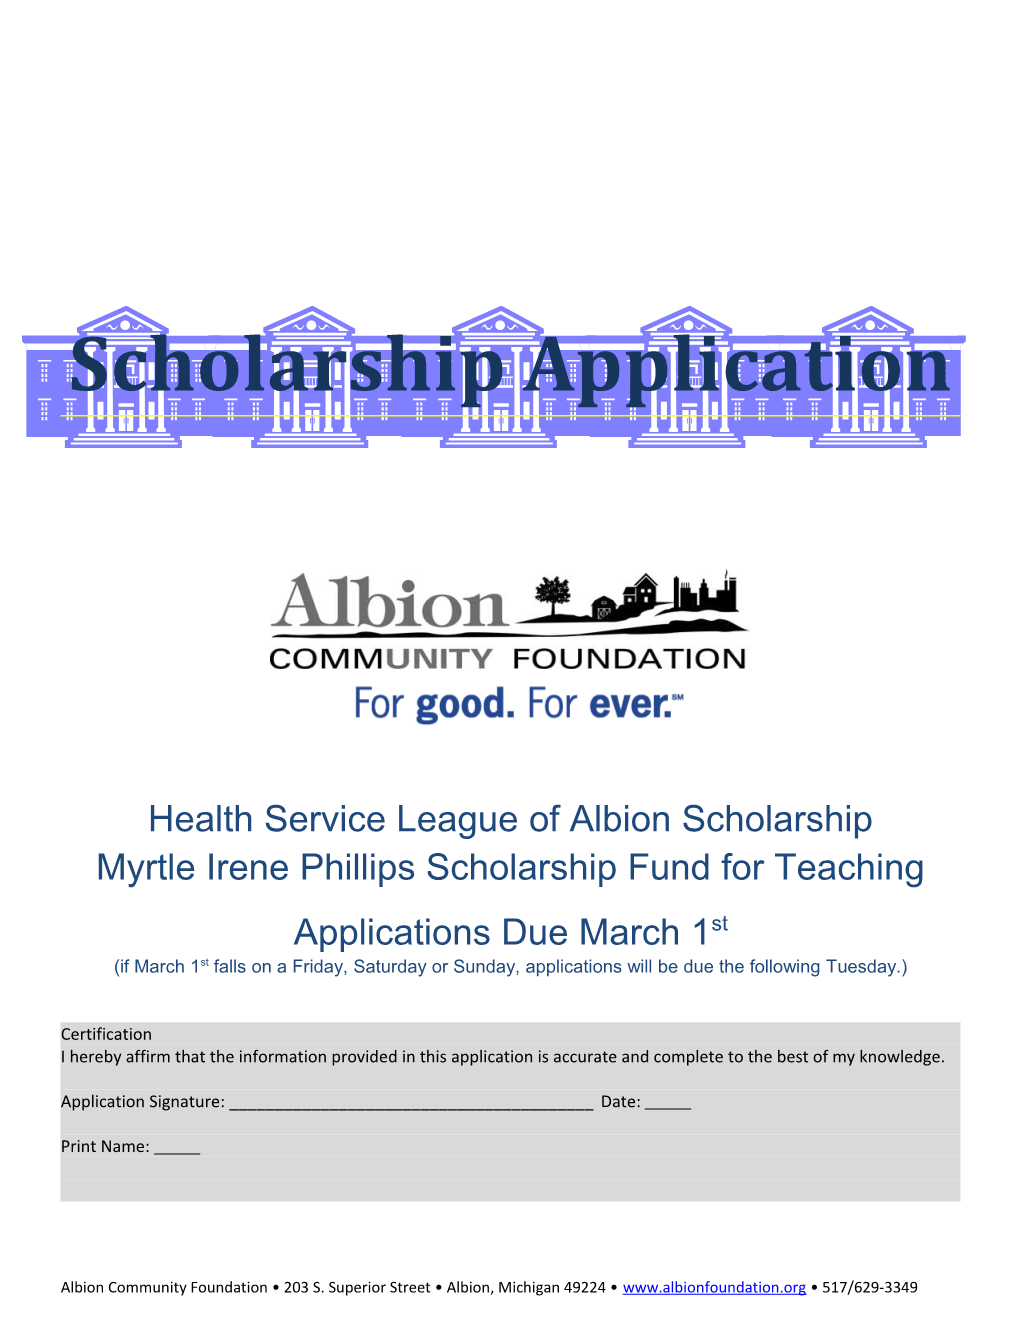 Health Service League of Albion Scholarship Myrtle Irene Phillips Scholarship Fund for Teaching